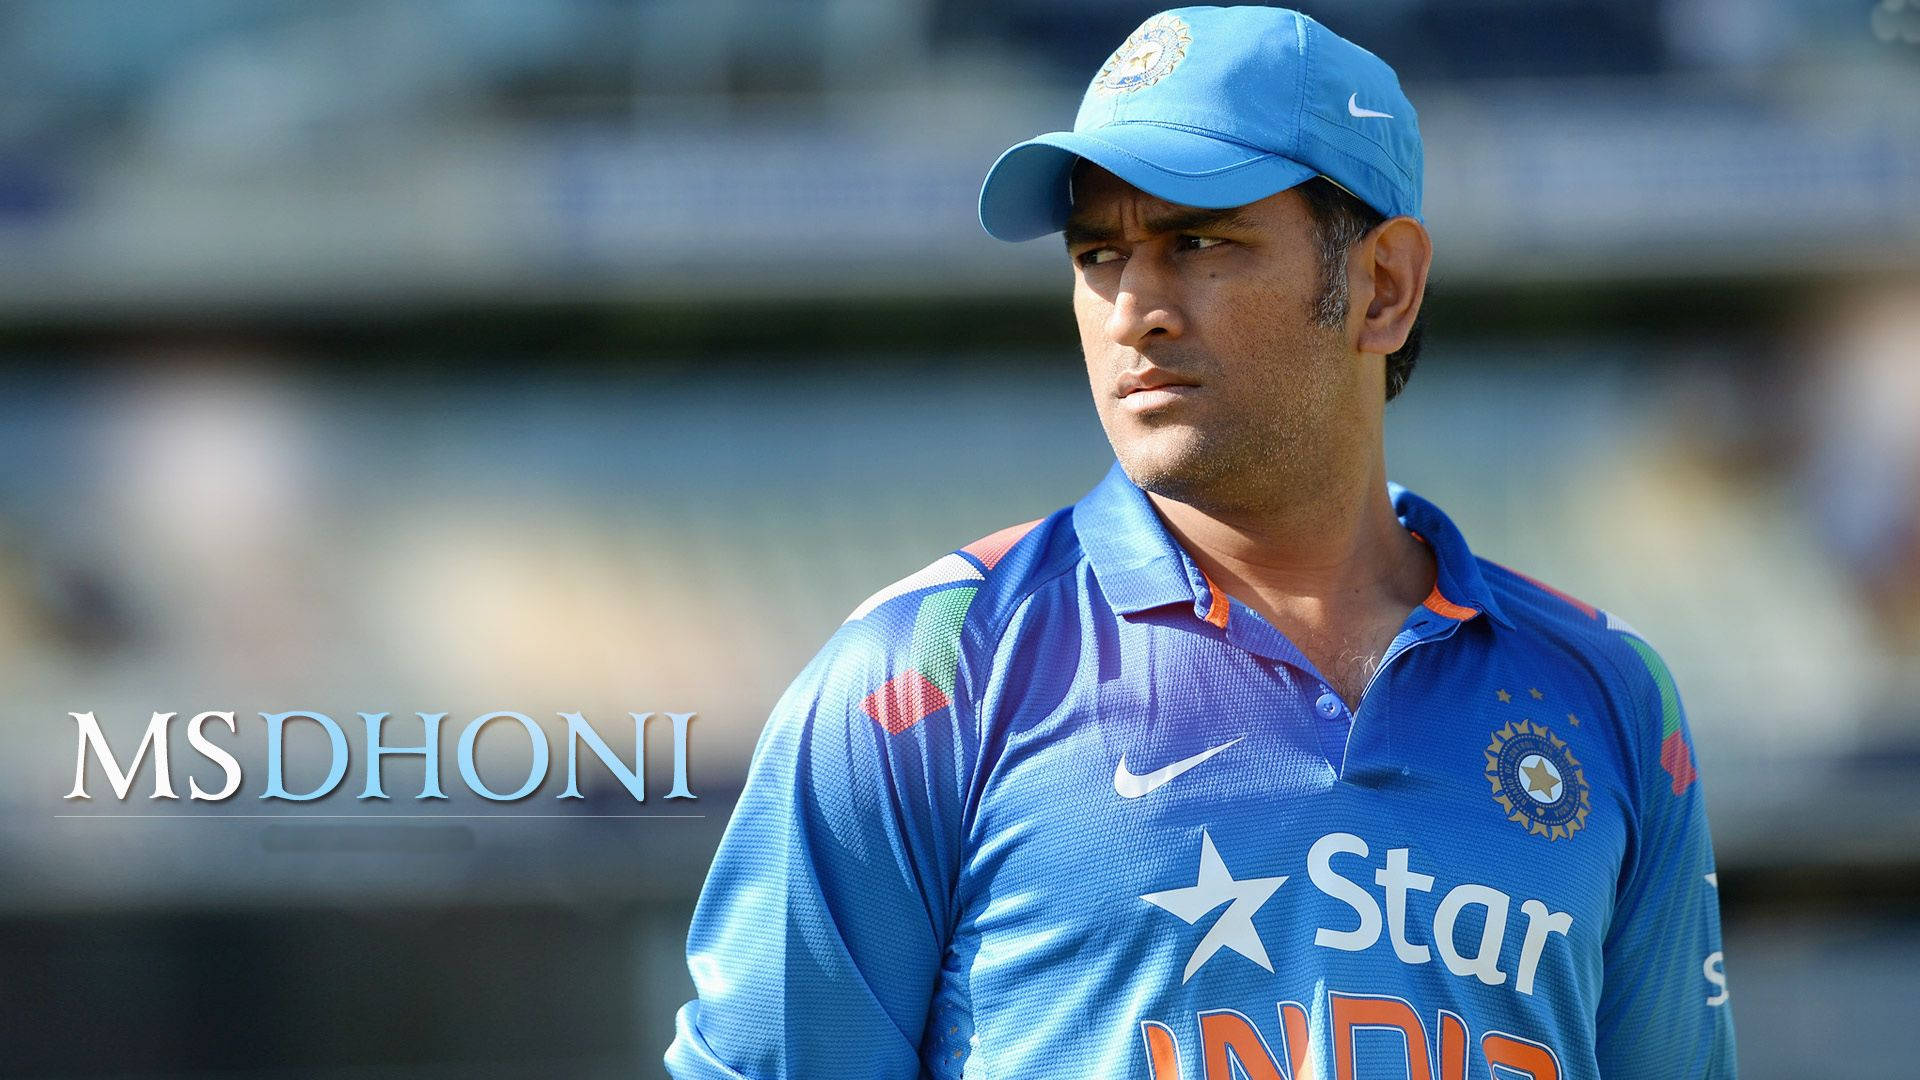 Indiskcricket Spelare Ms Dhoni - Indian Cricket Player Ms Dhoni Wallpaper